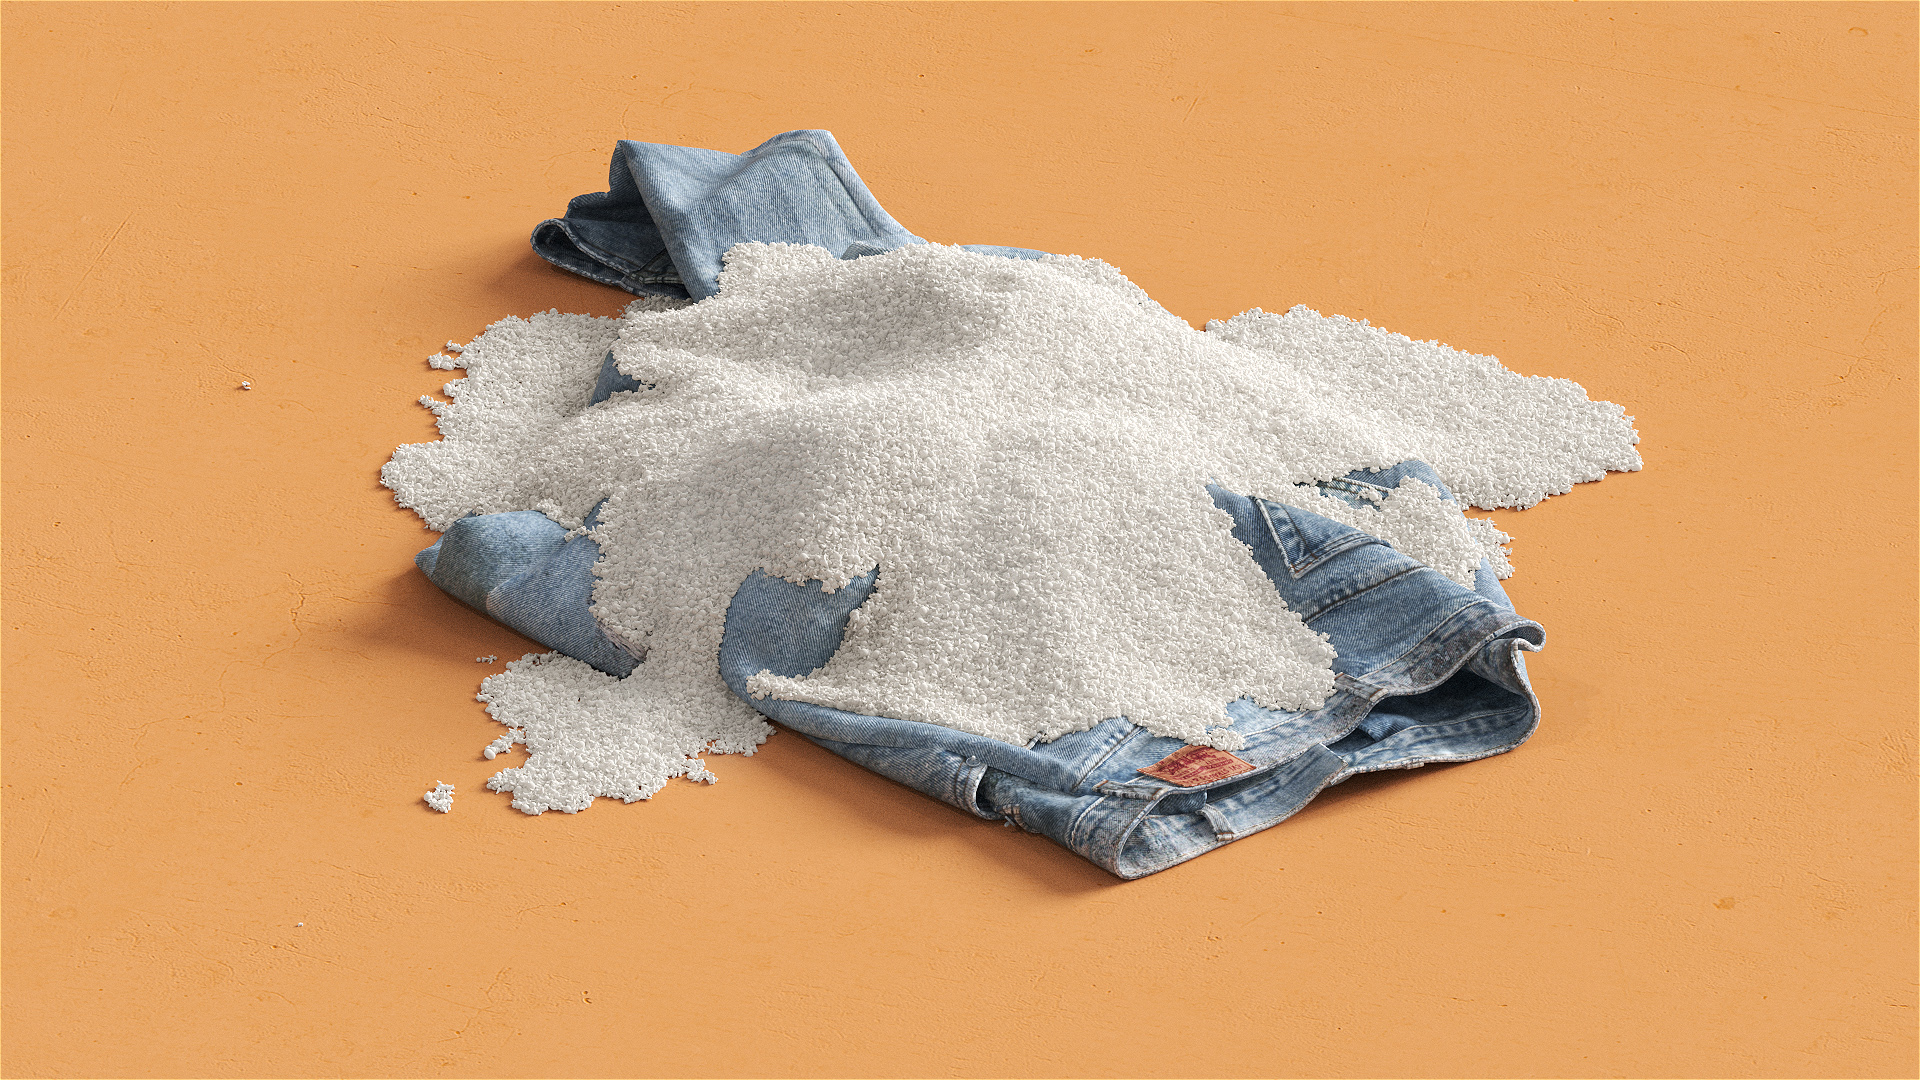 Circulose recycled from denim